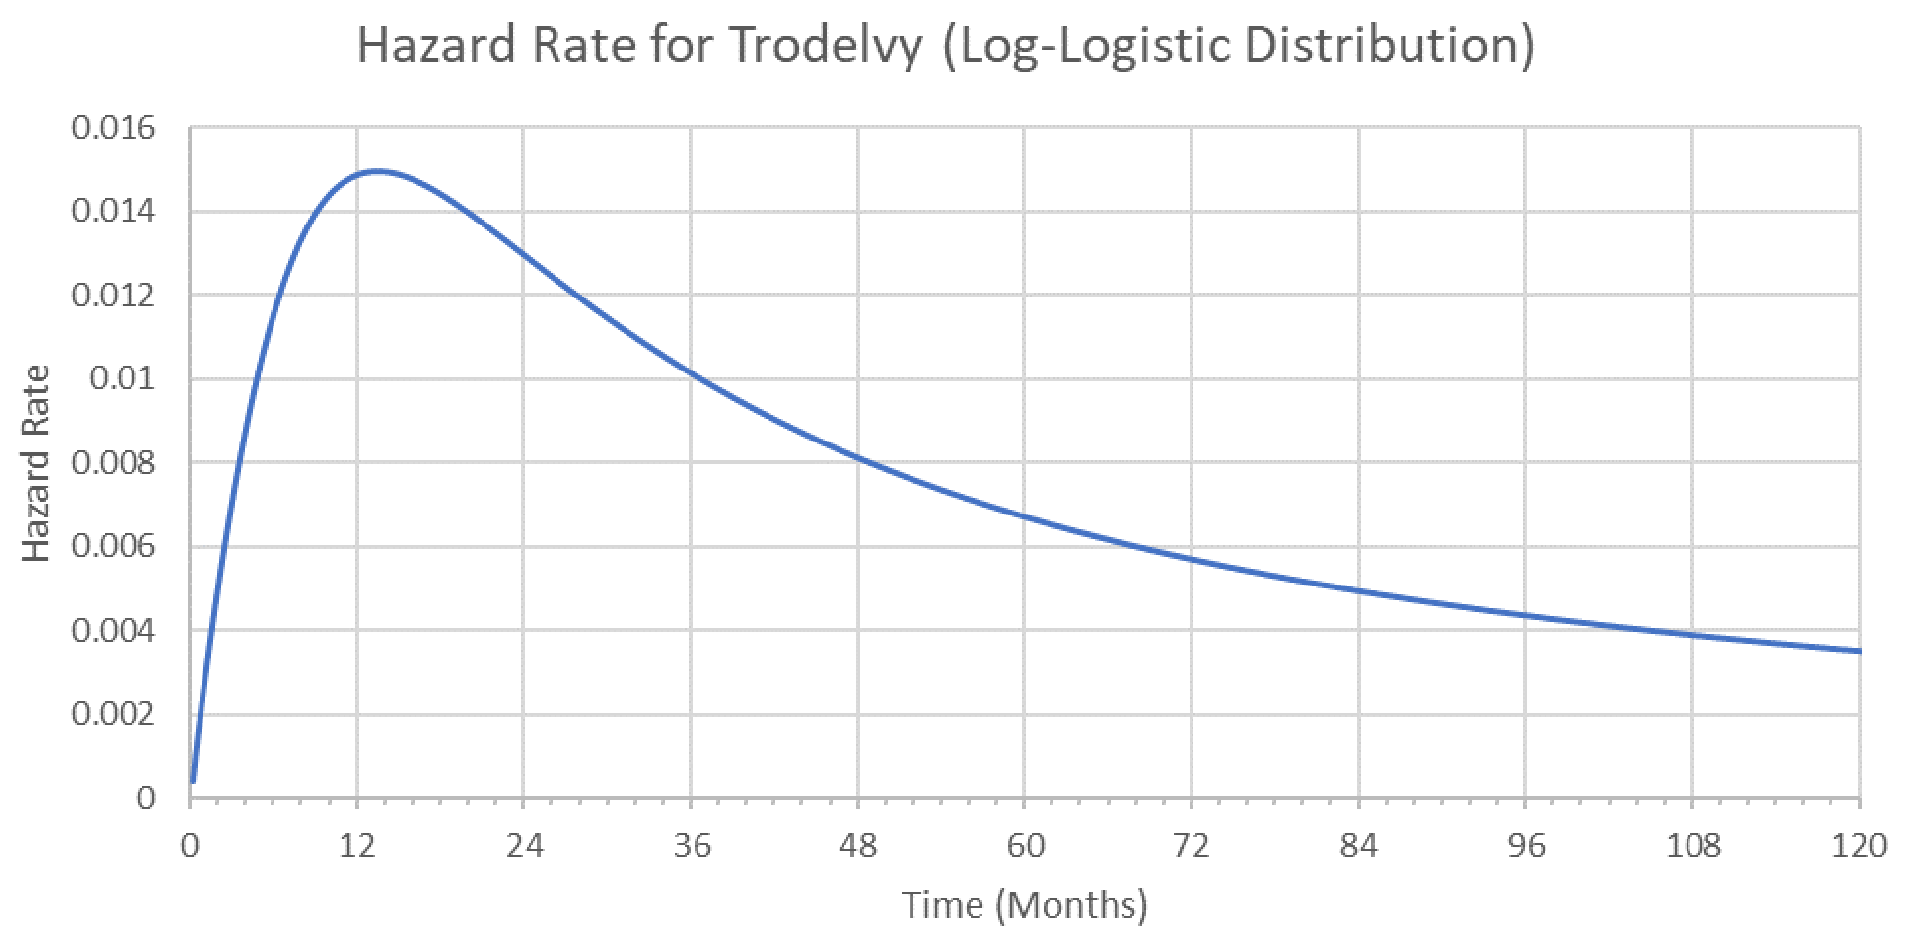 The figure represents how the hazard rate changes over time using a log-logistic parametric fit. The y-axis is the hazard rate with a higher value indicating a higher risk of death. The x-axis is time in months.